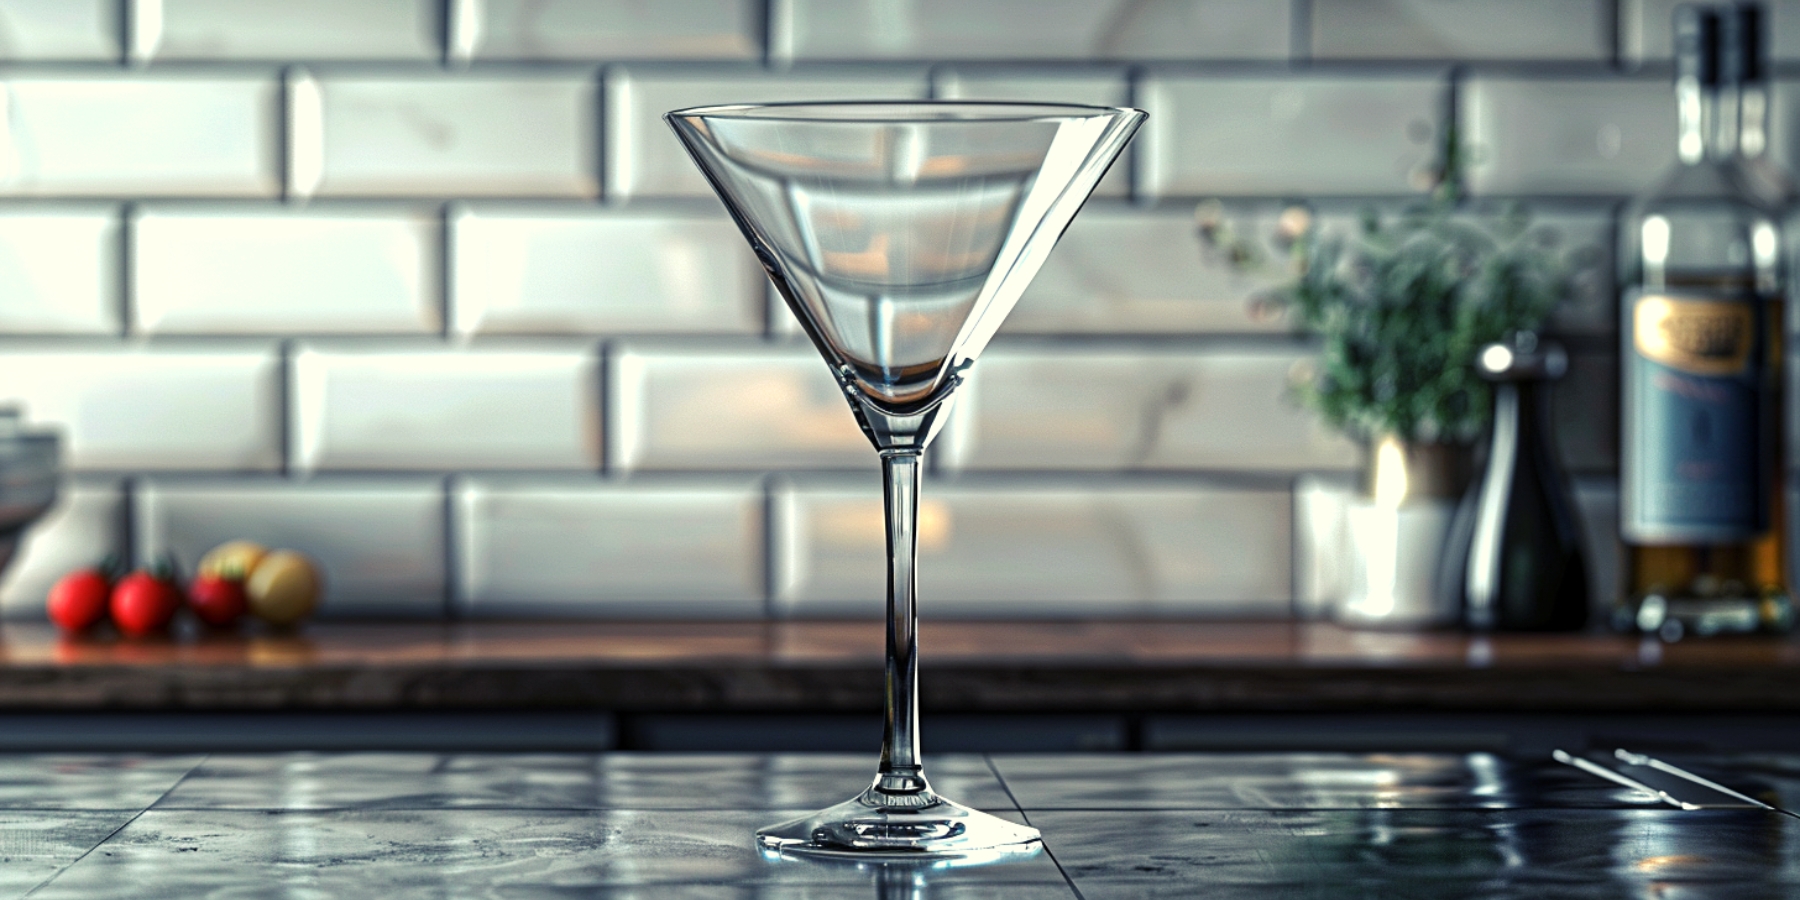 What's your favourite cocktail glassware?